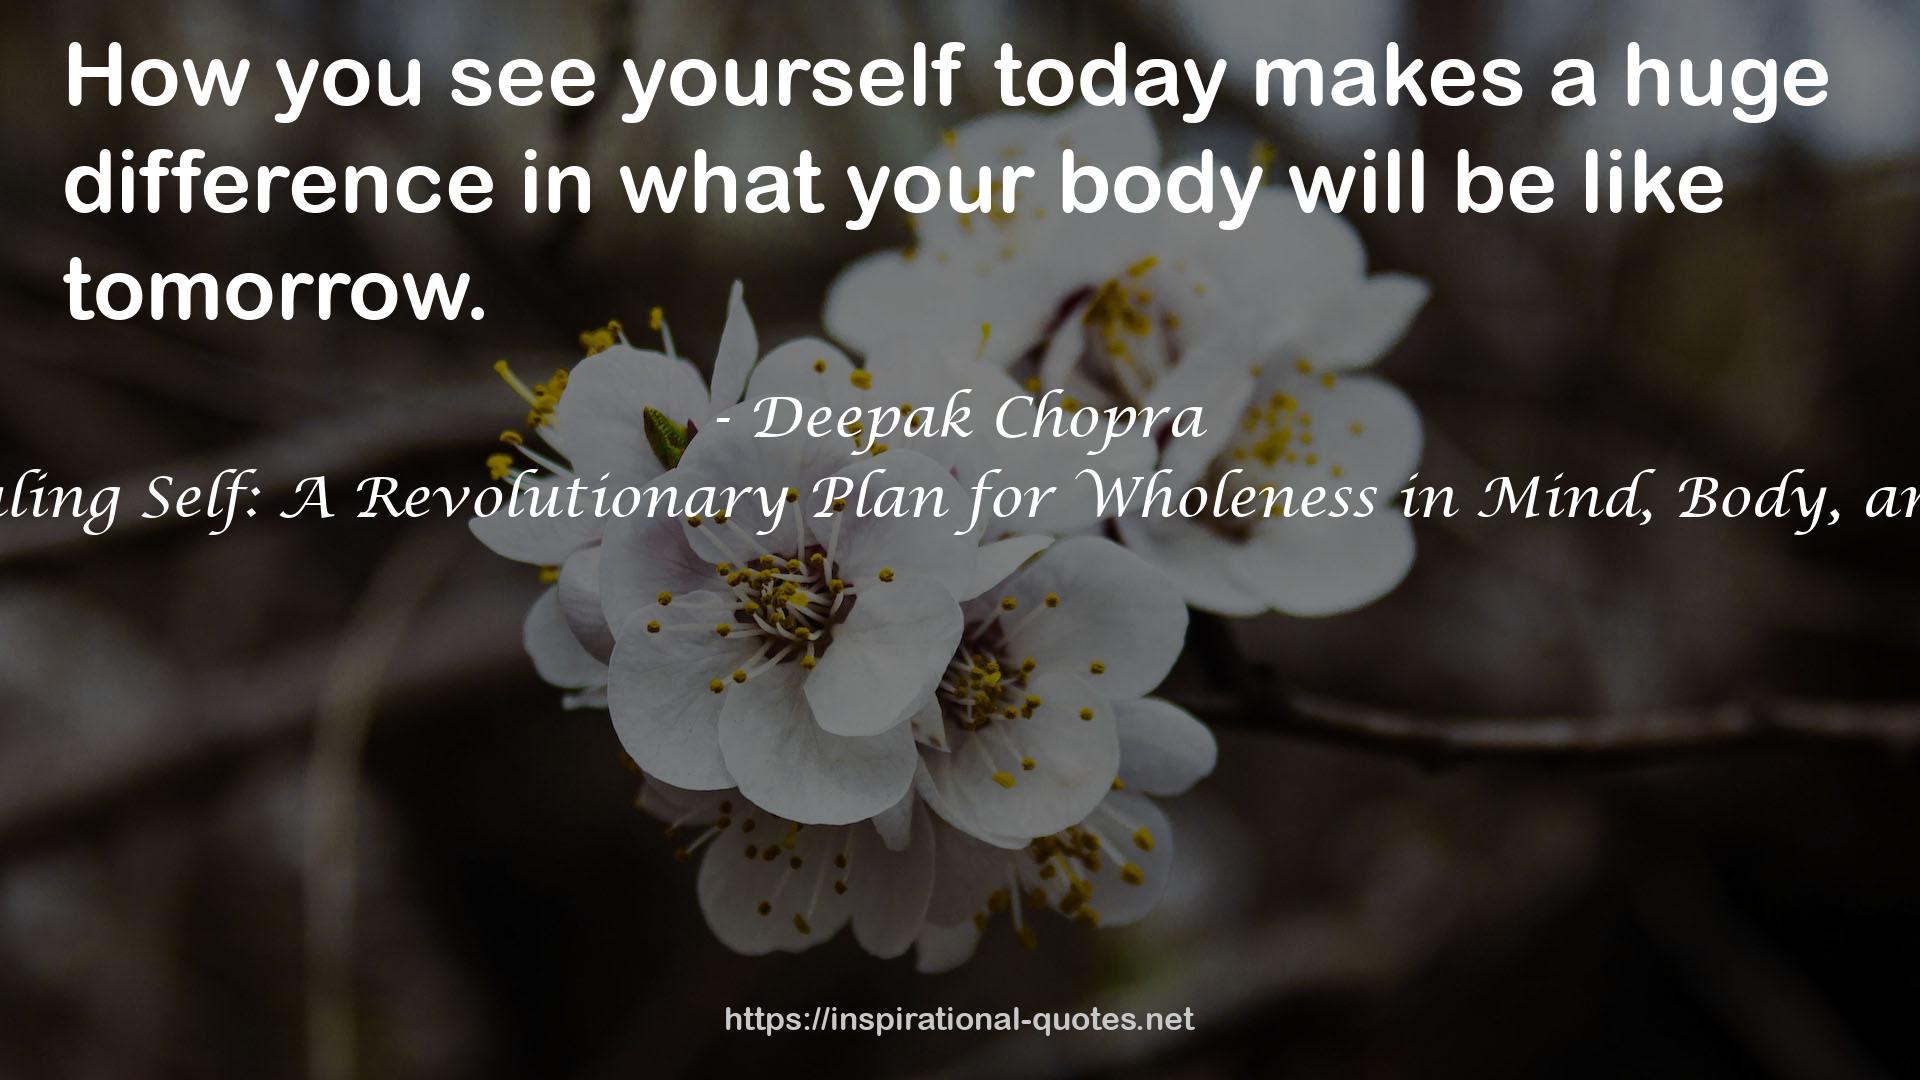 The Healing Self: A Revolutionary Plan for Wholeness in Mind, Body, and Spirit QUOTES